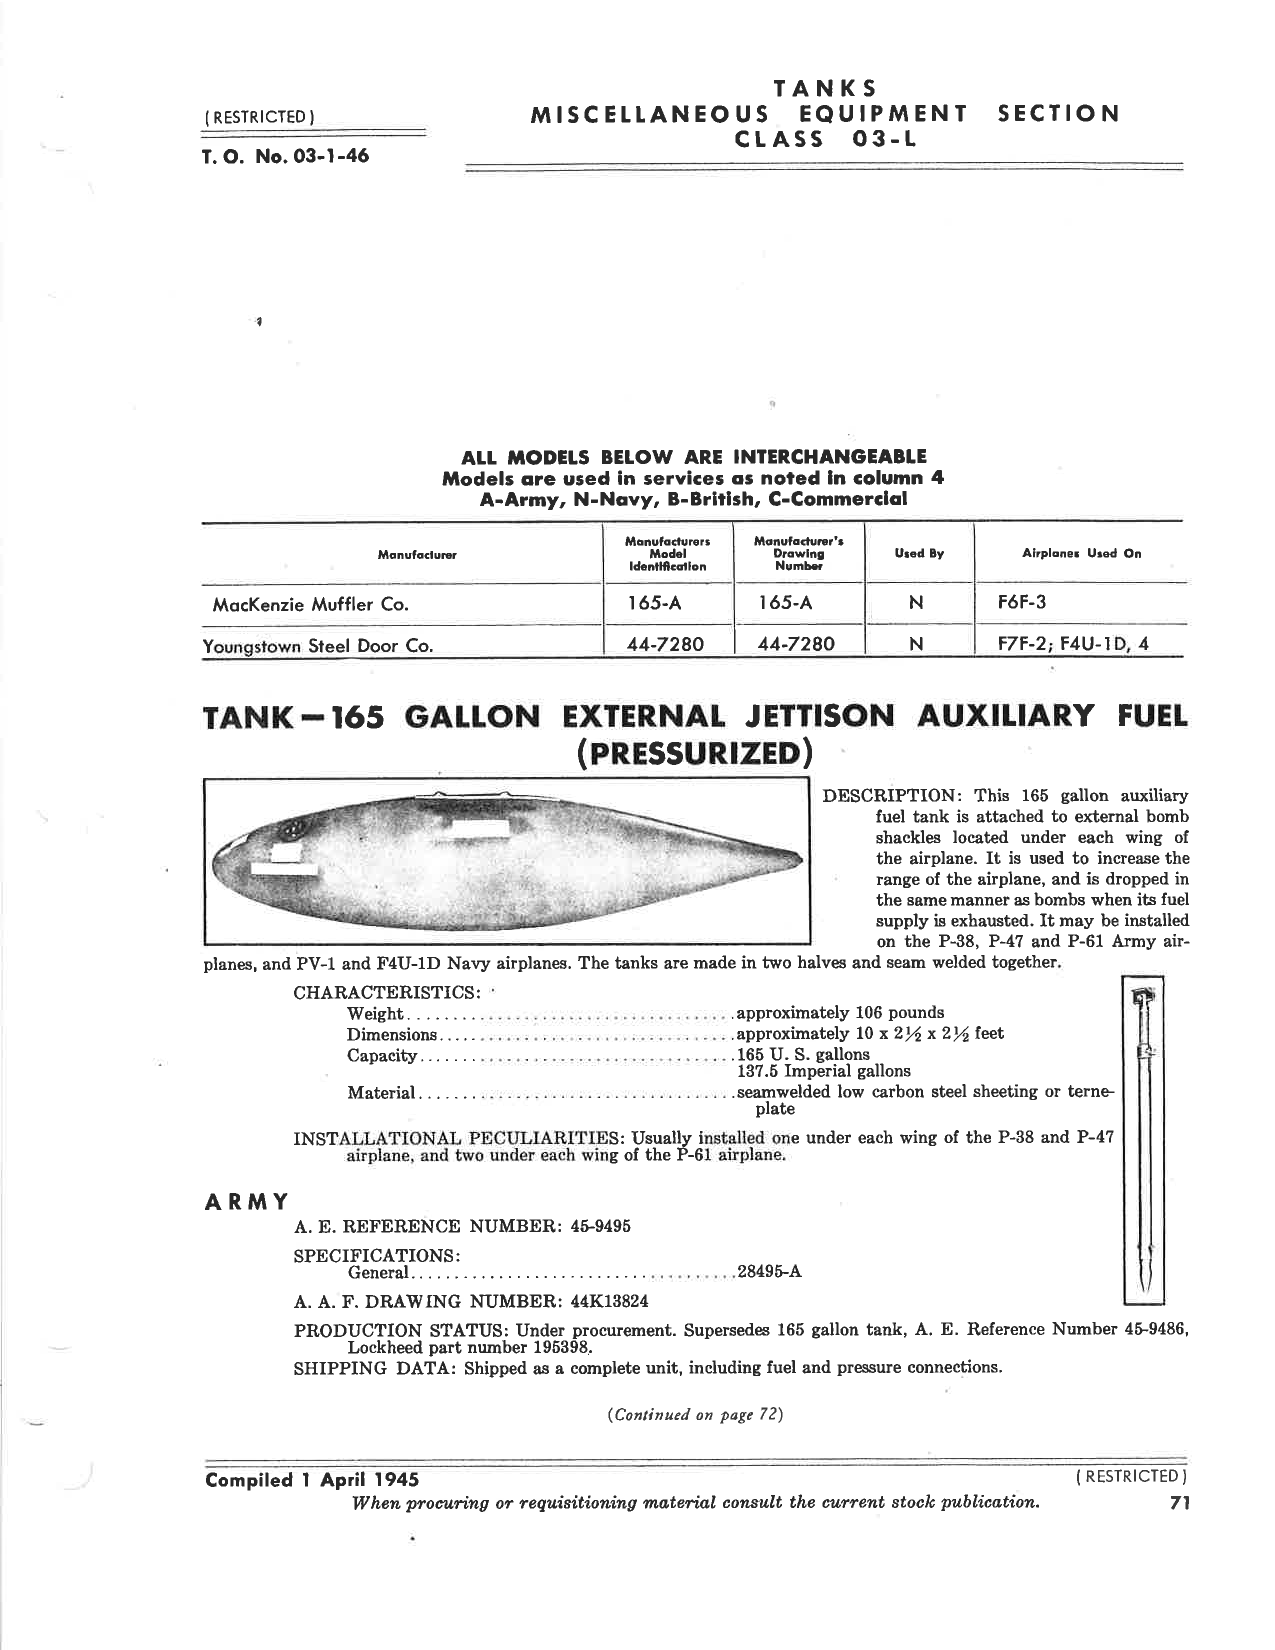 Sample page 8 from AirCorps Library document: Tanks - Misc Equipment Section - Class 03-L